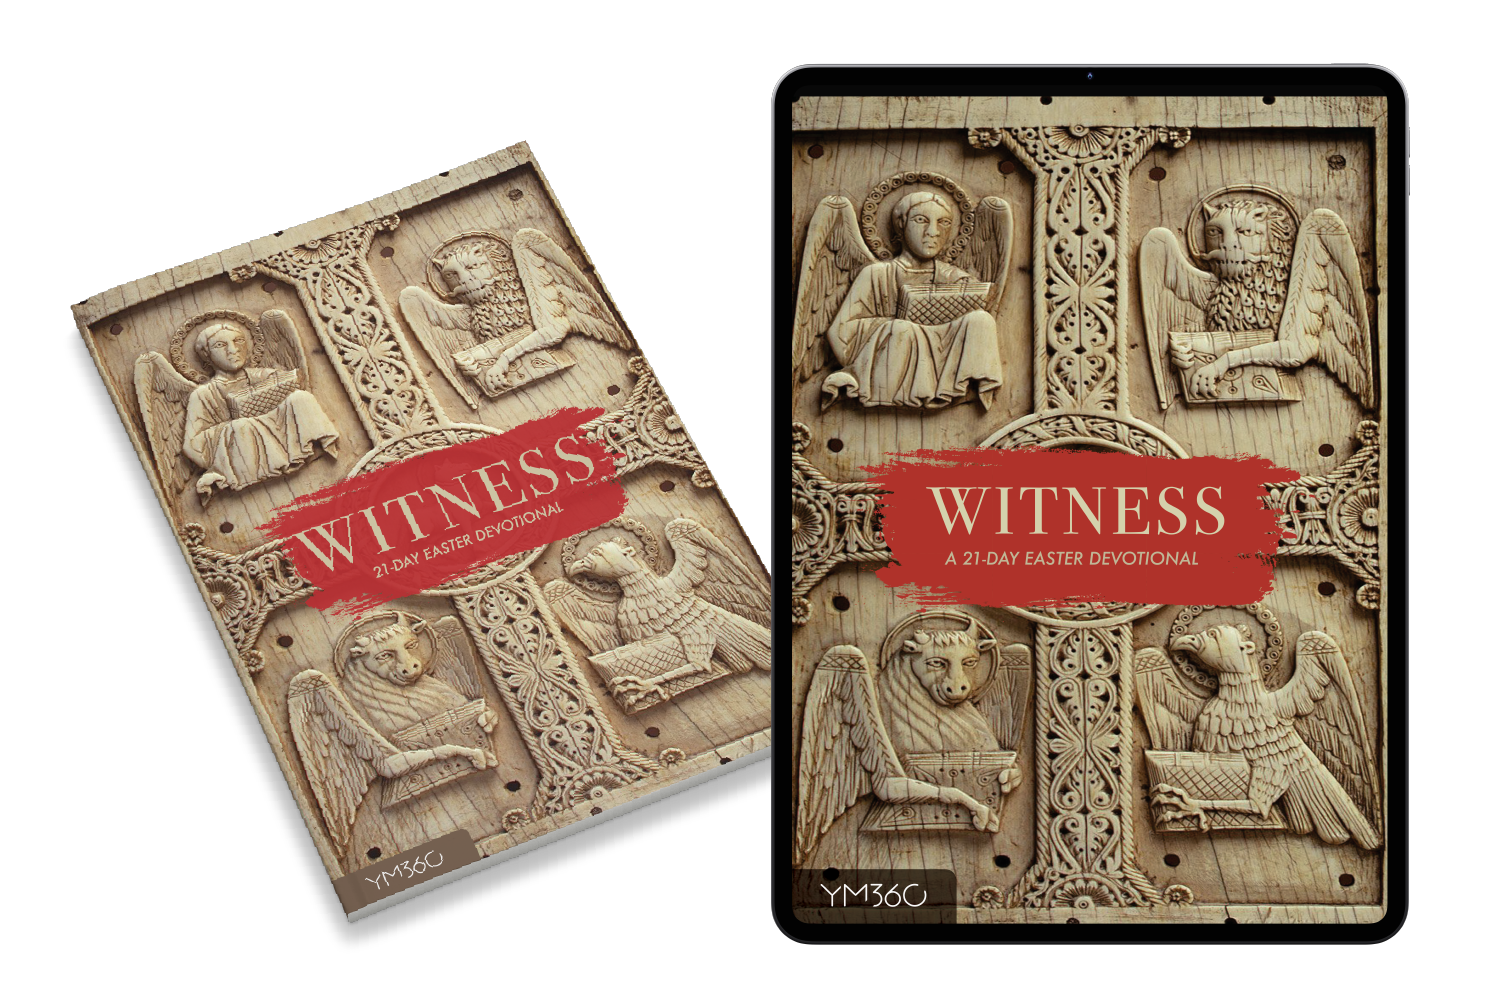 [DOWNLOADABLE VERSION] Witness: A 21-Day Easter Devotional